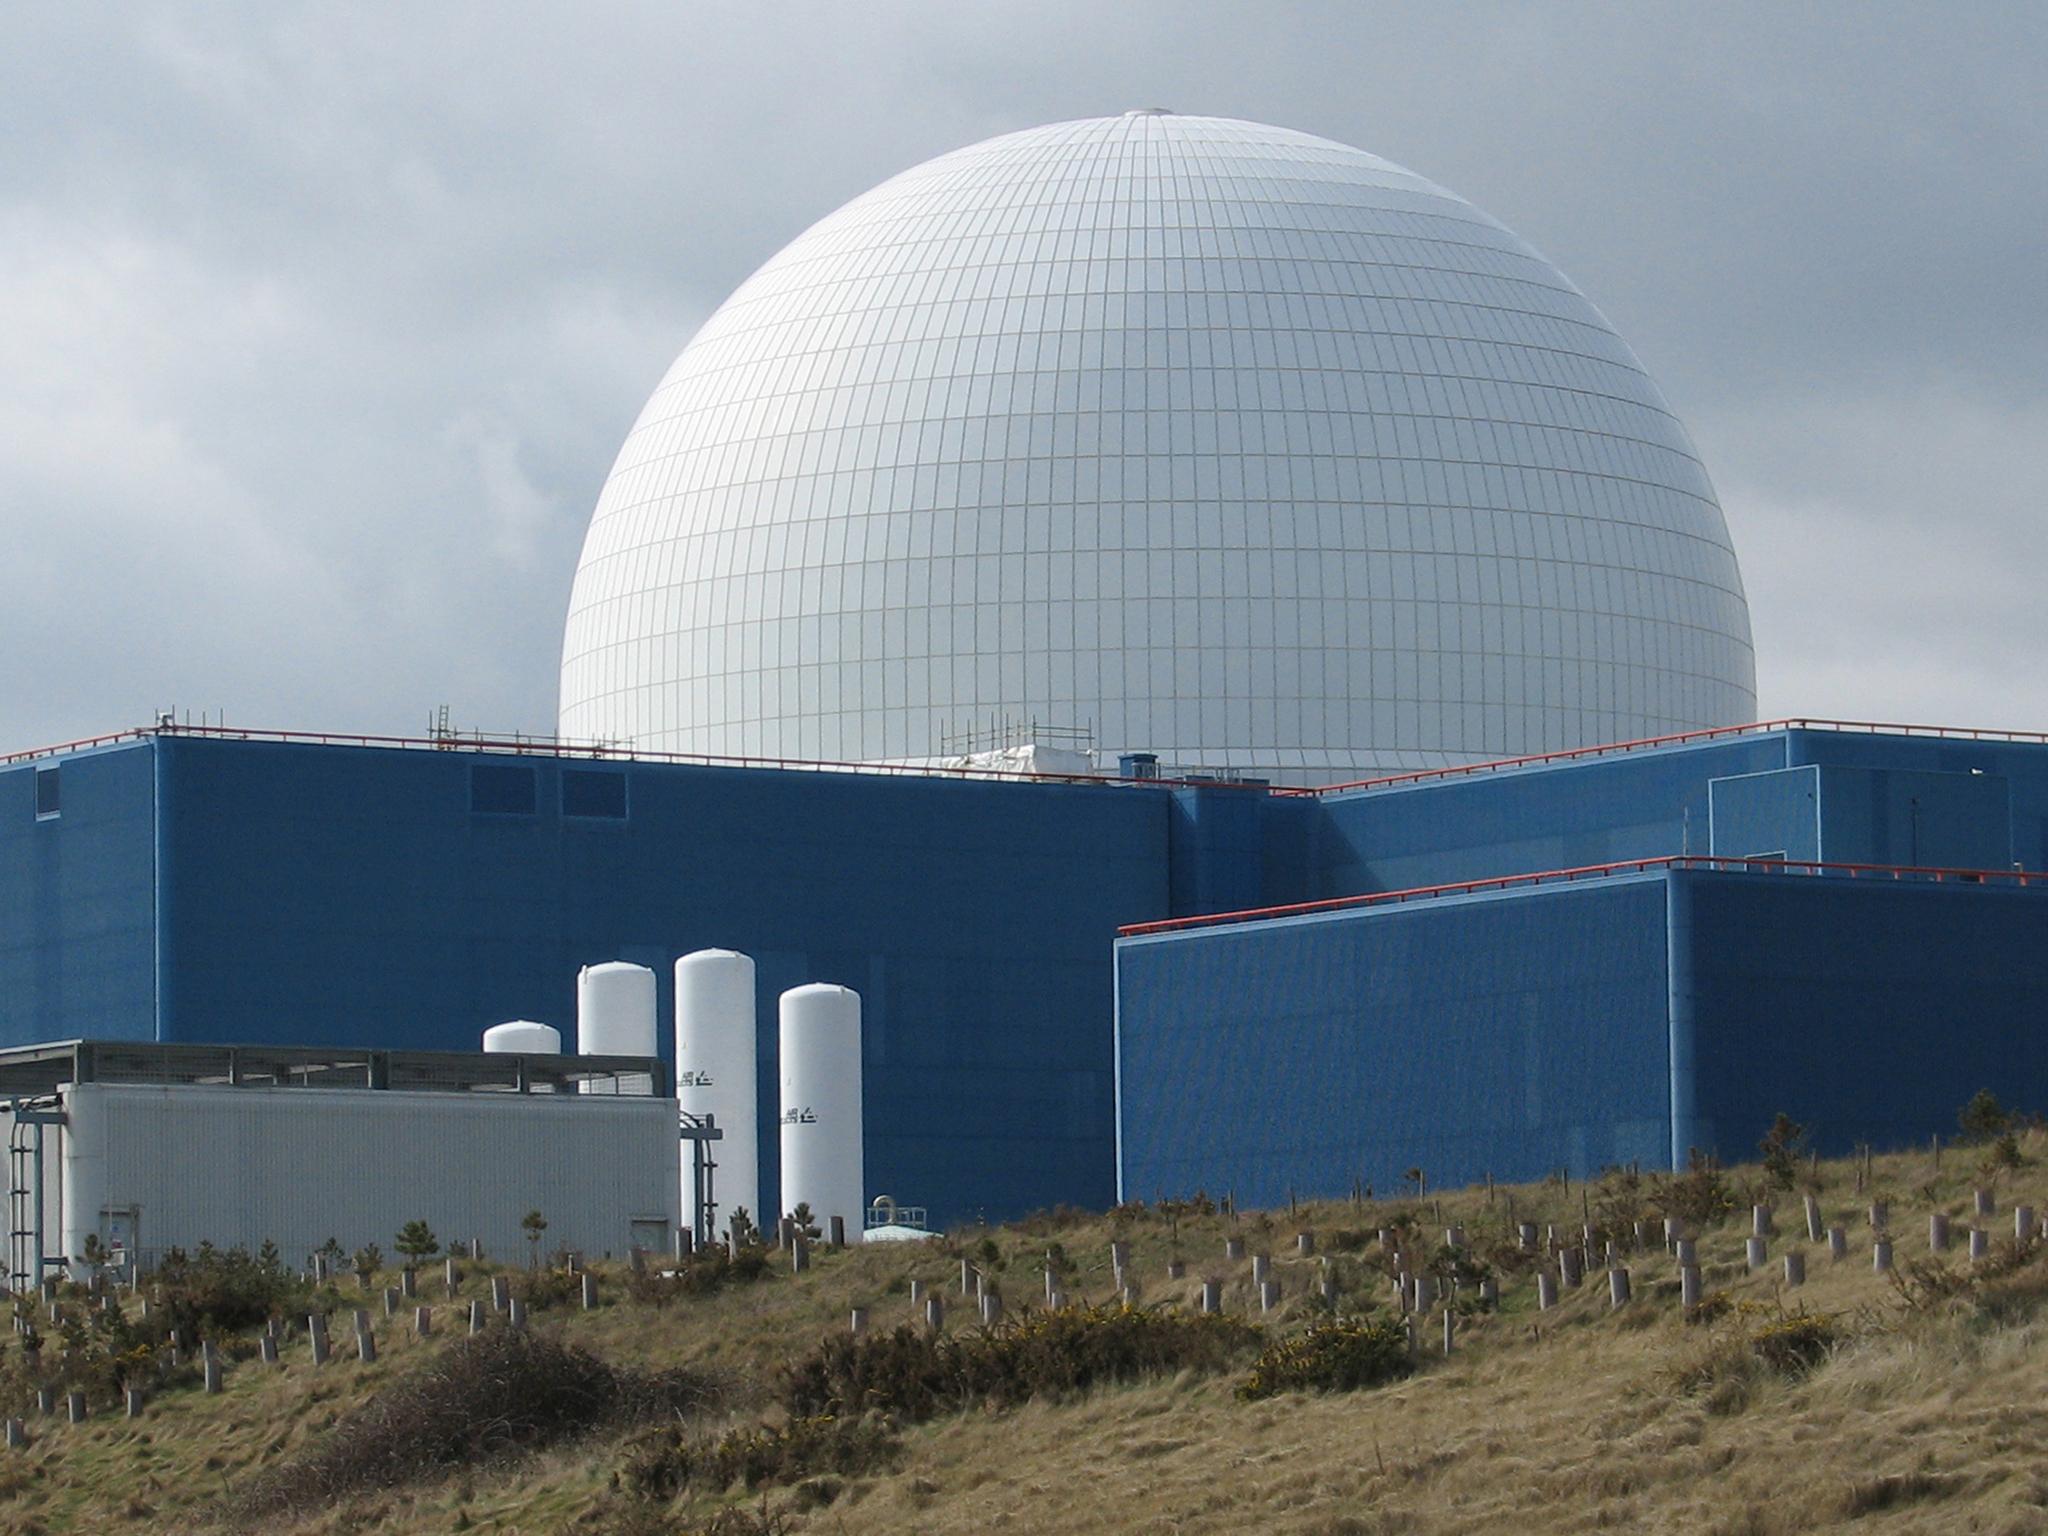 £20bn plant Sizewell C planned for land next to existing Sizewell B facility in Suffolk